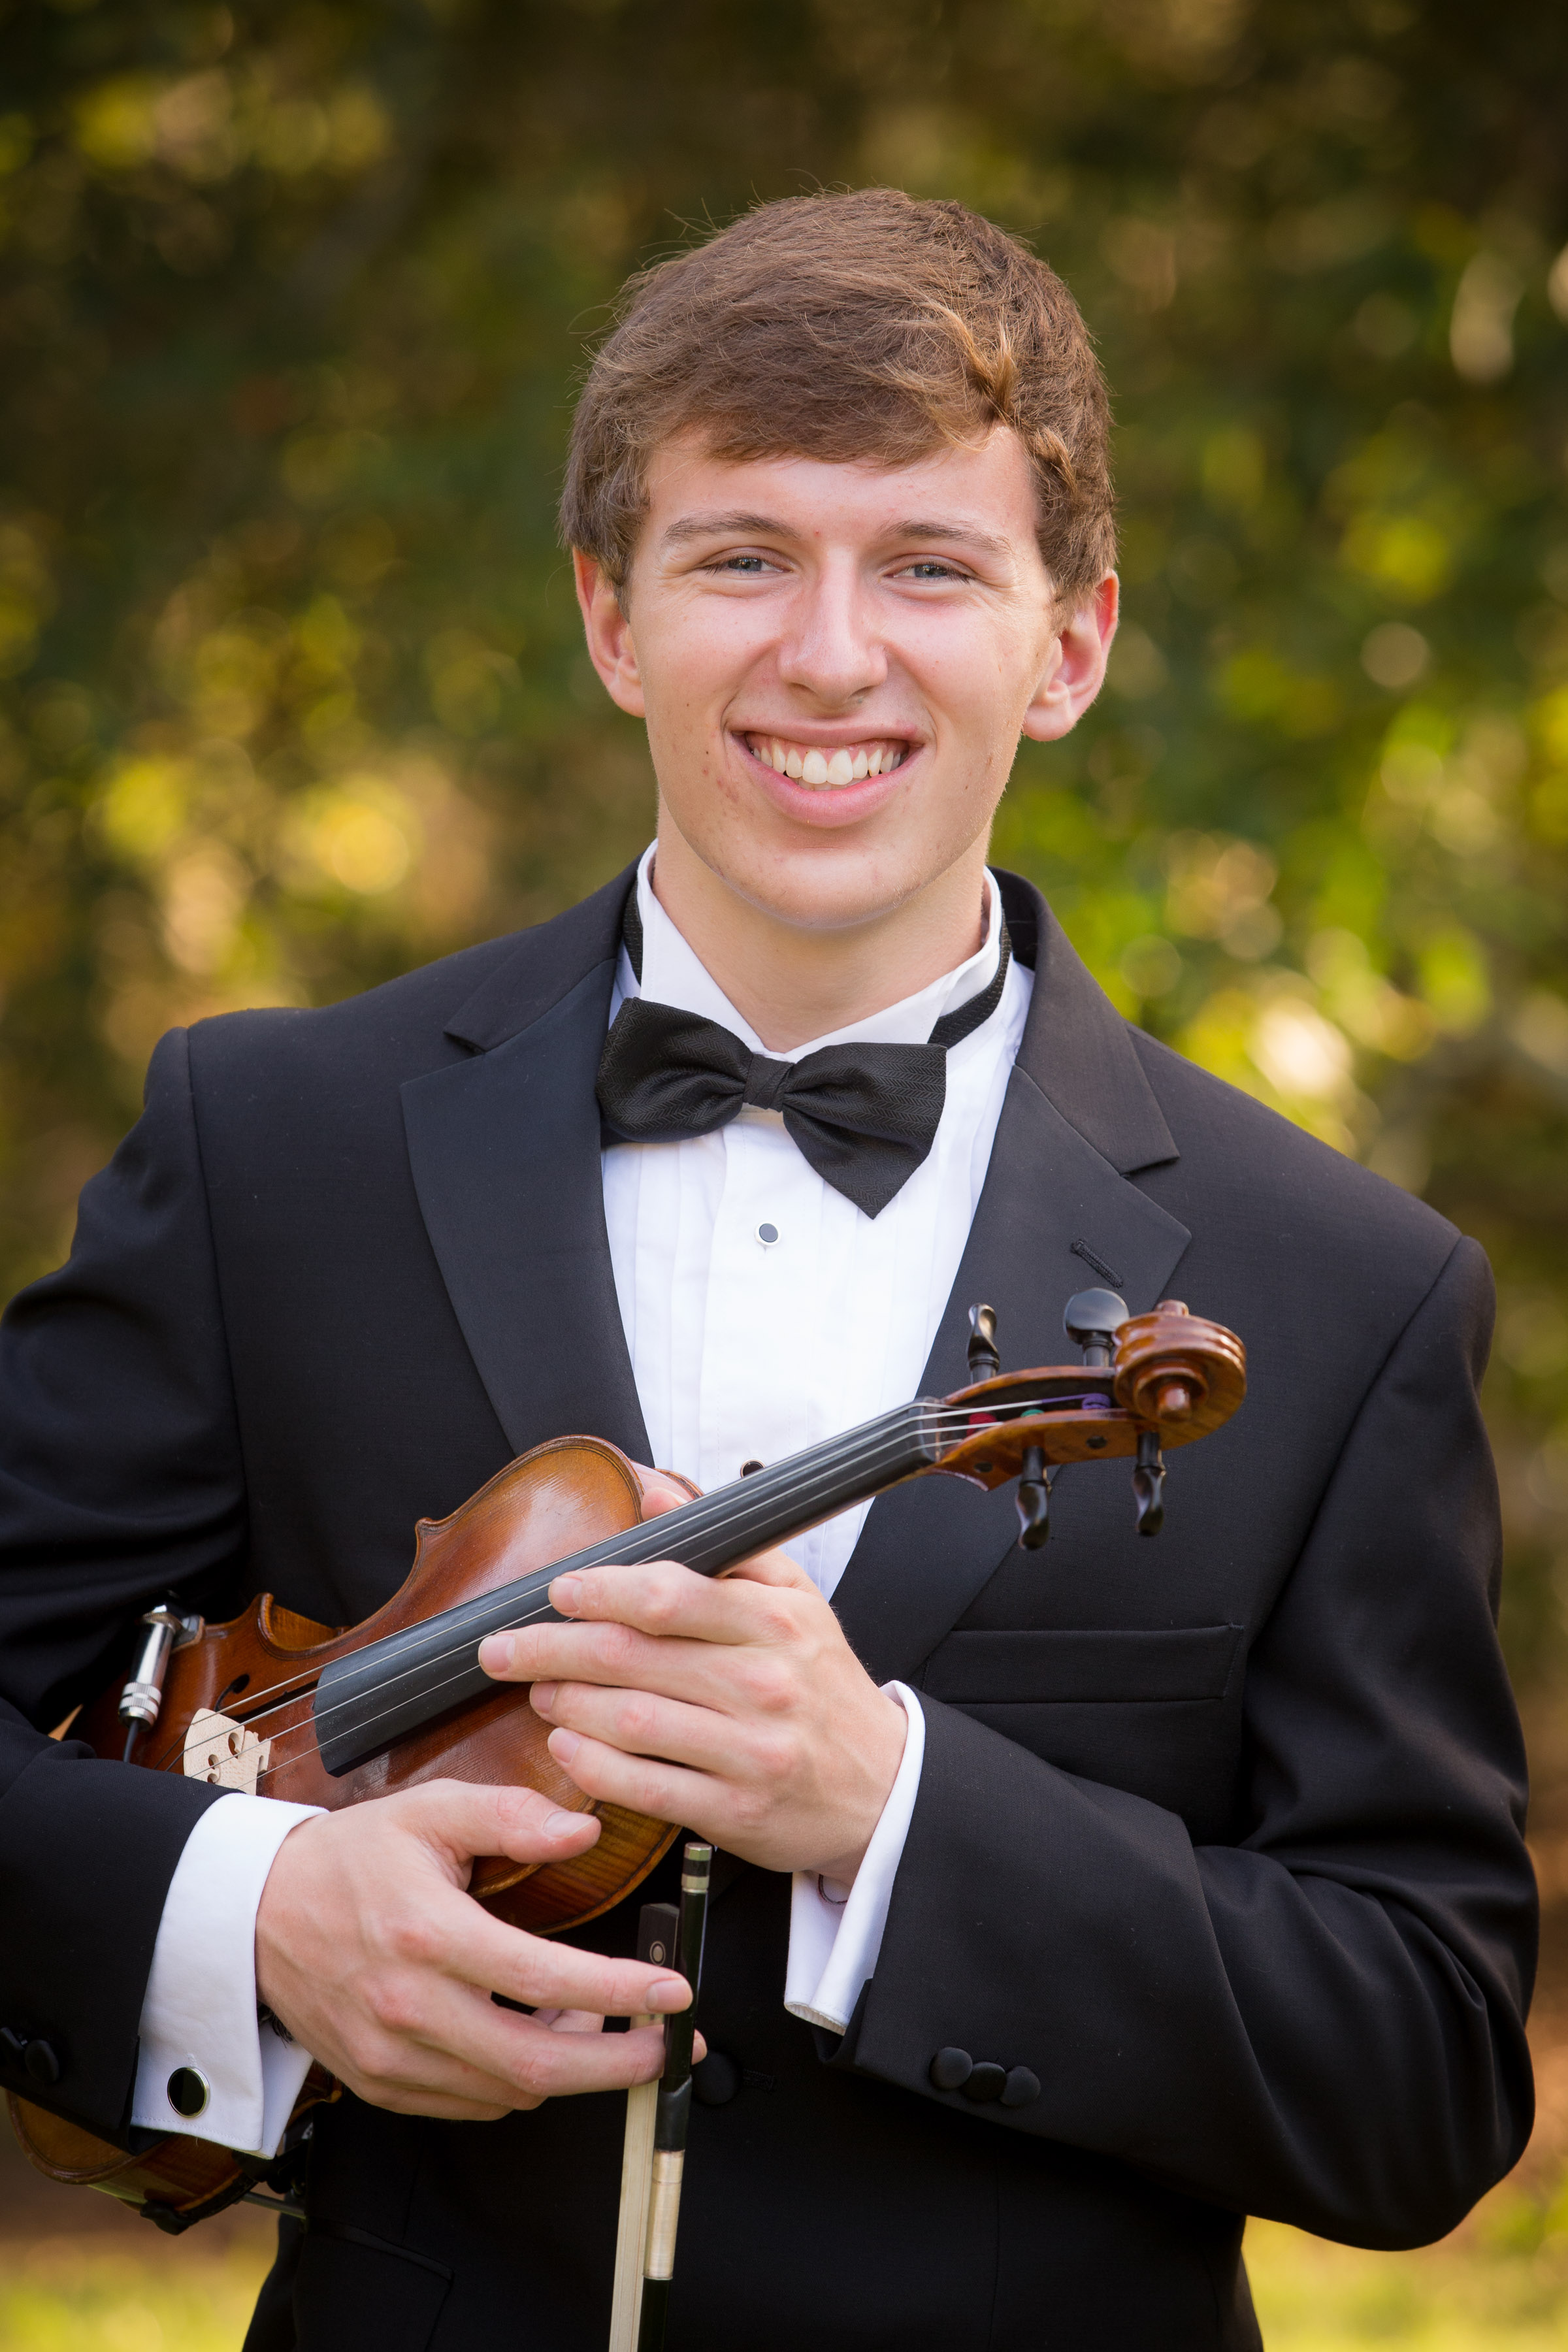 Noel Hilst played violin in the Westmont Orchestra